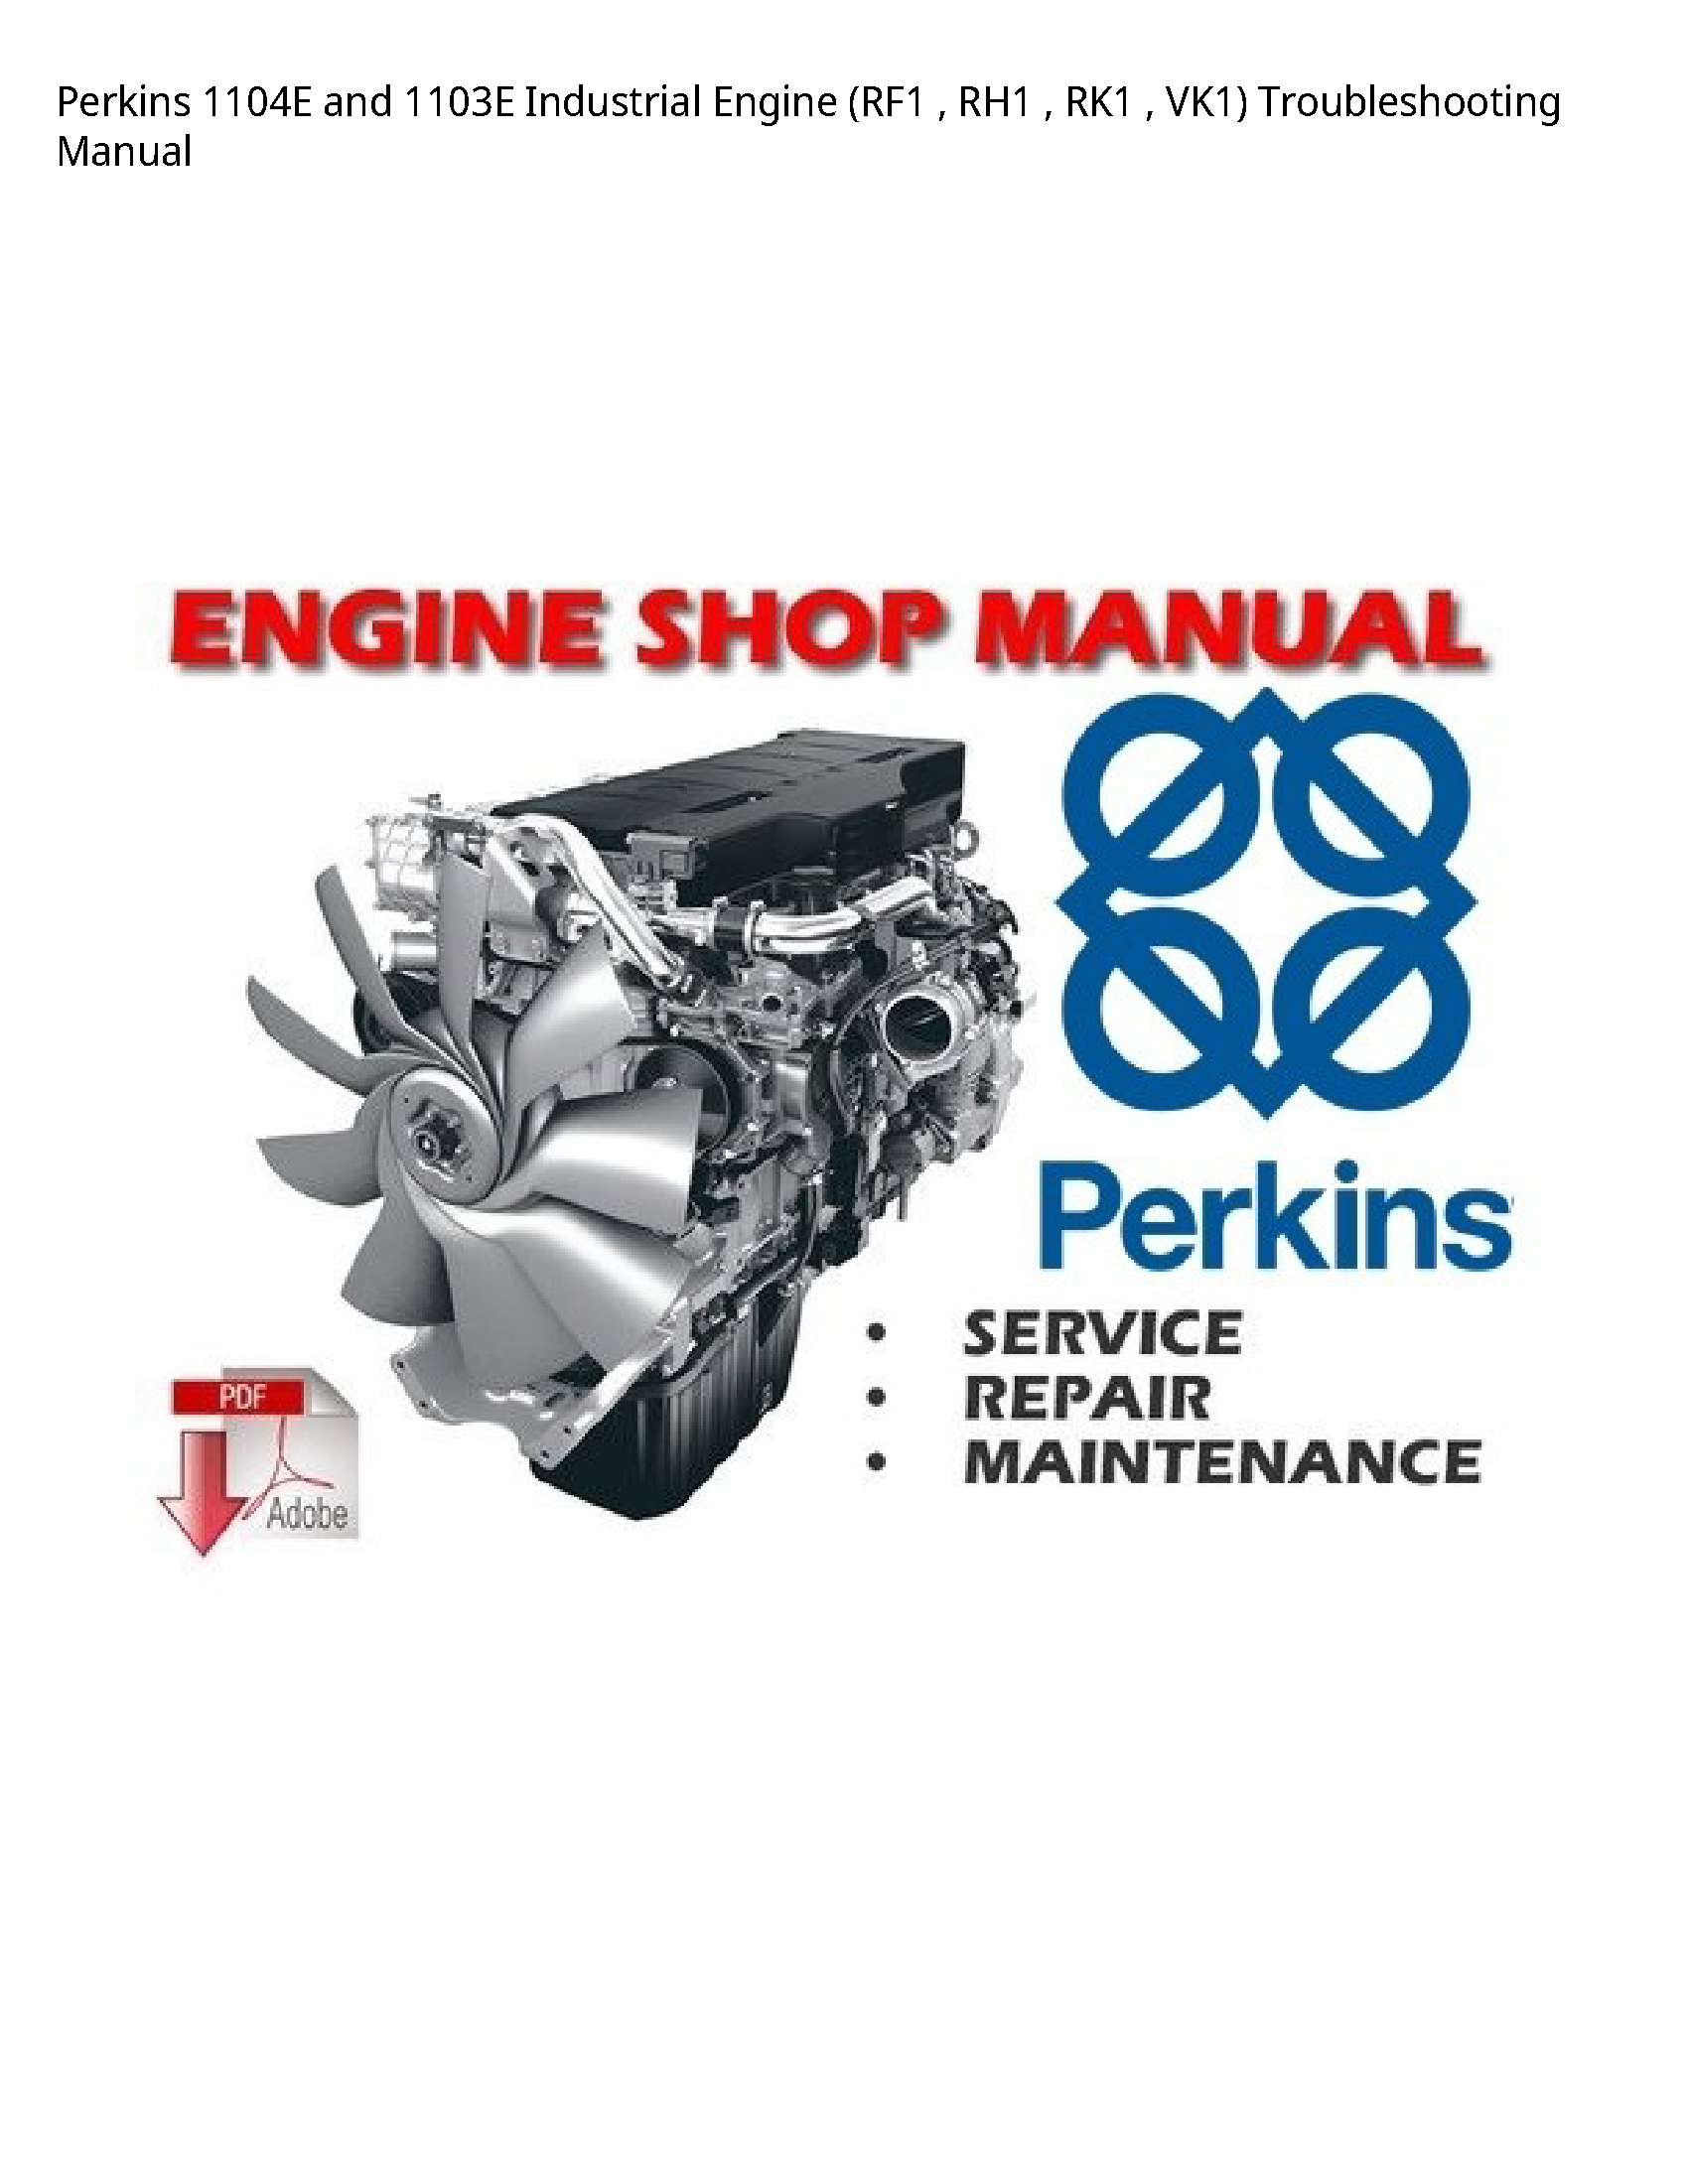 Perkins 1104E  Industrial Engine Troubleshooting manual